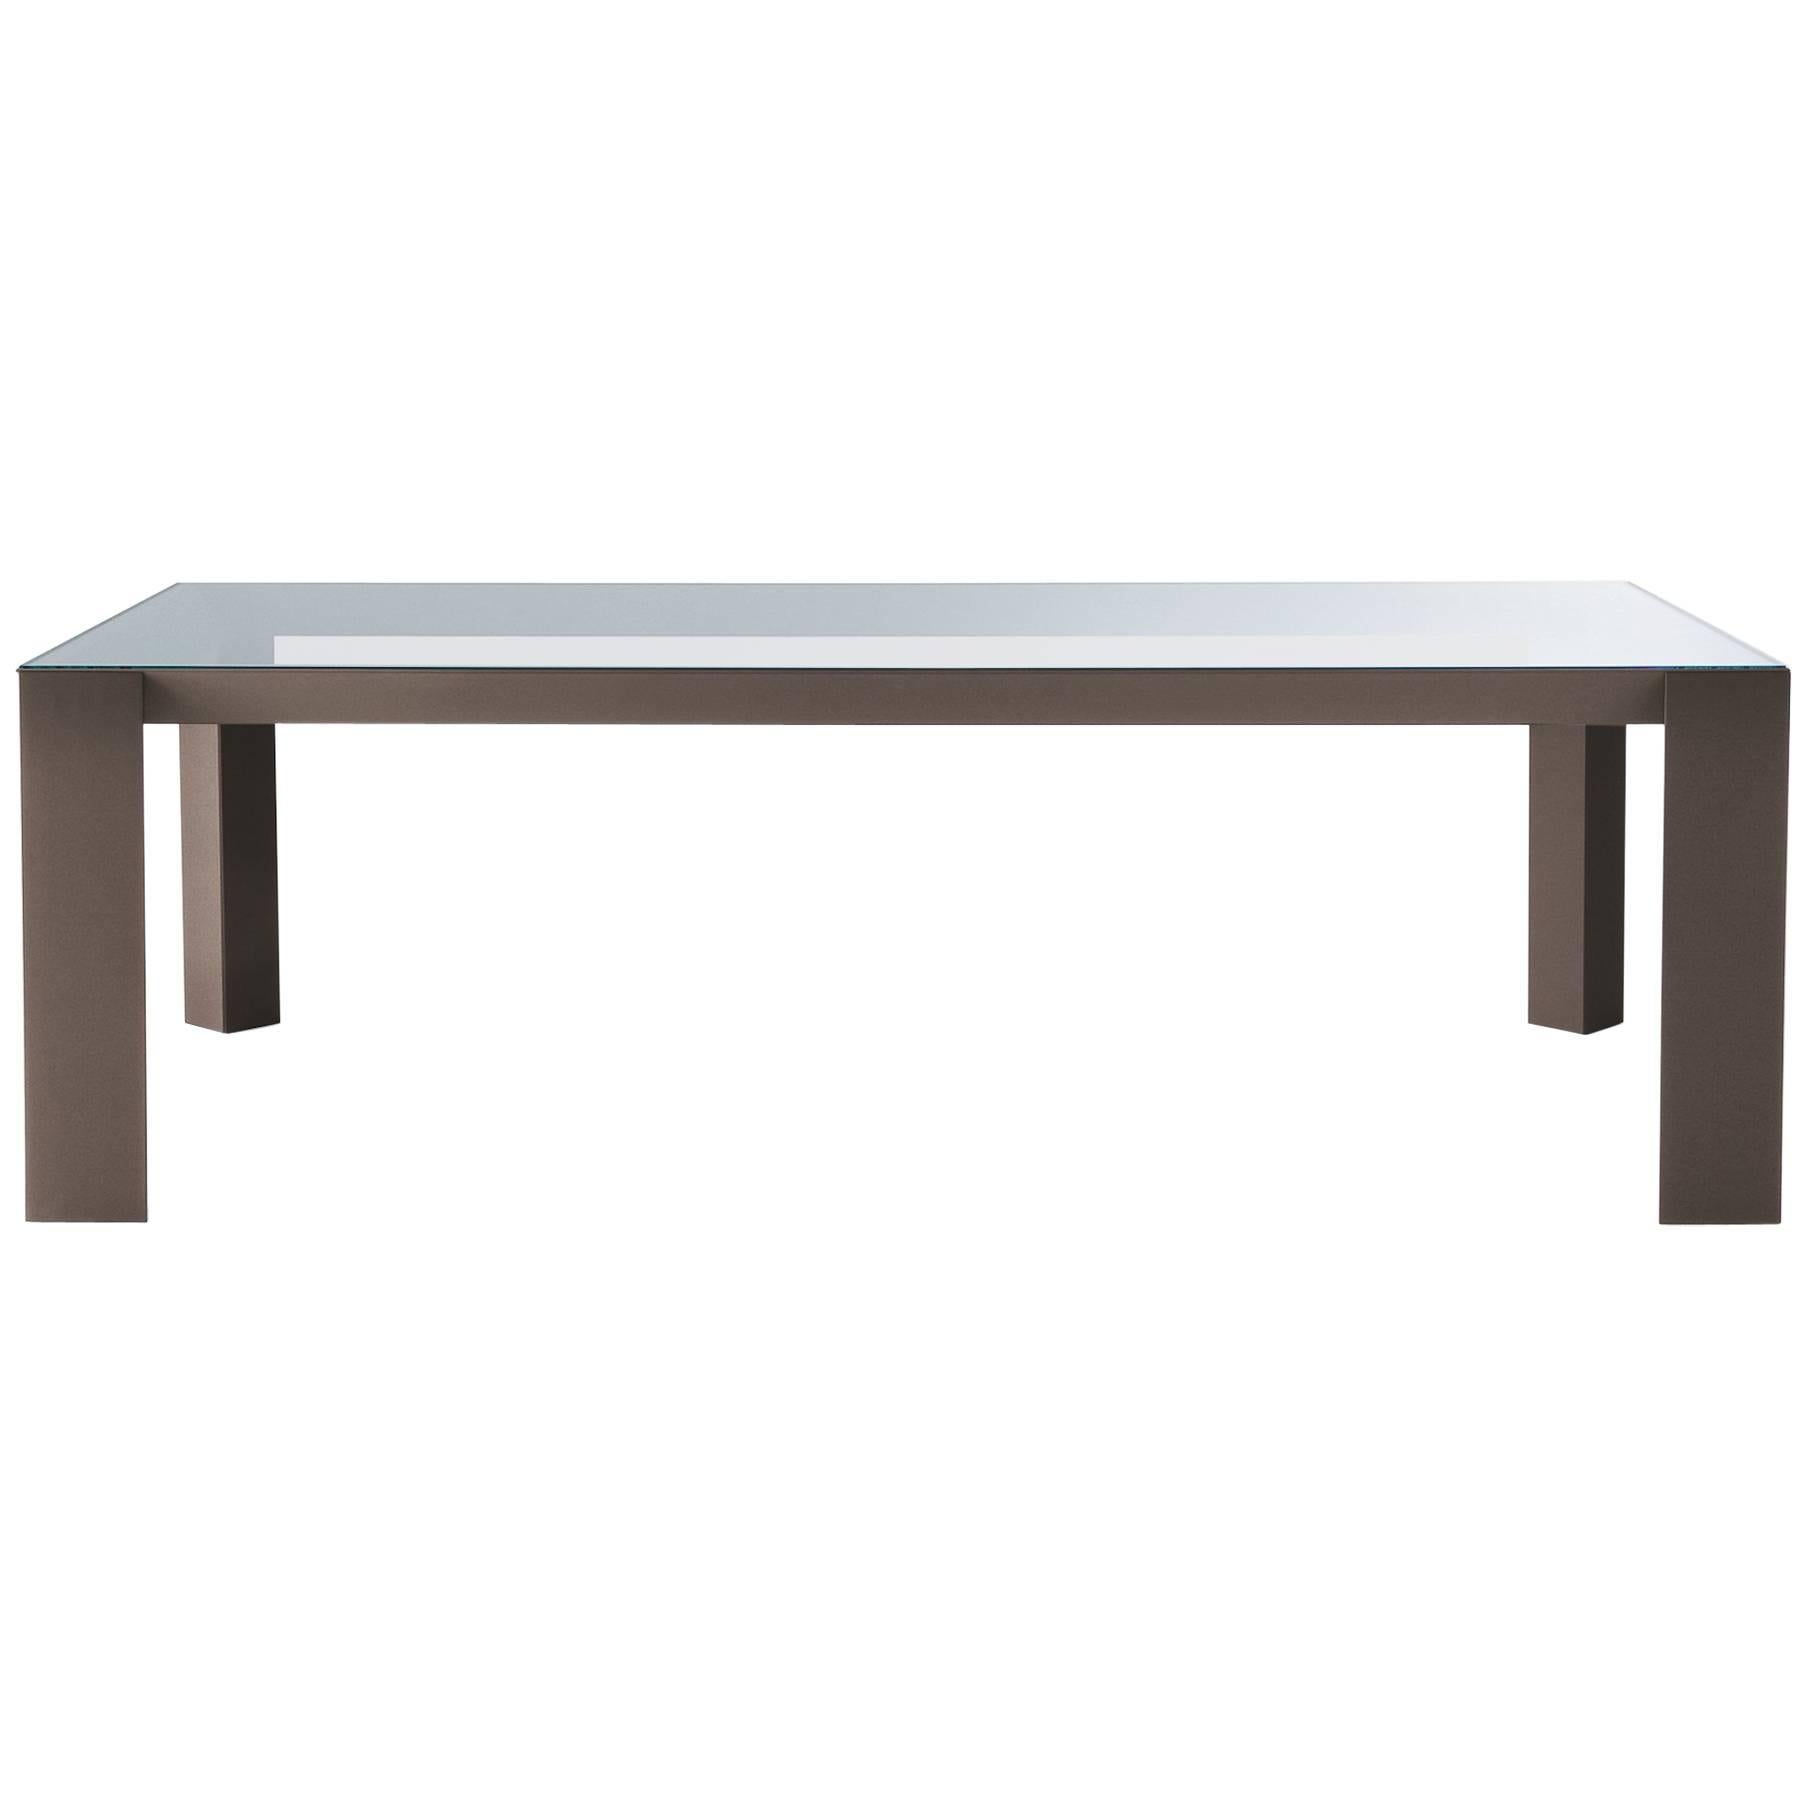 Gallotti an Radice Koy Table in Wood or Lacquered Base with Glass Top For Sale